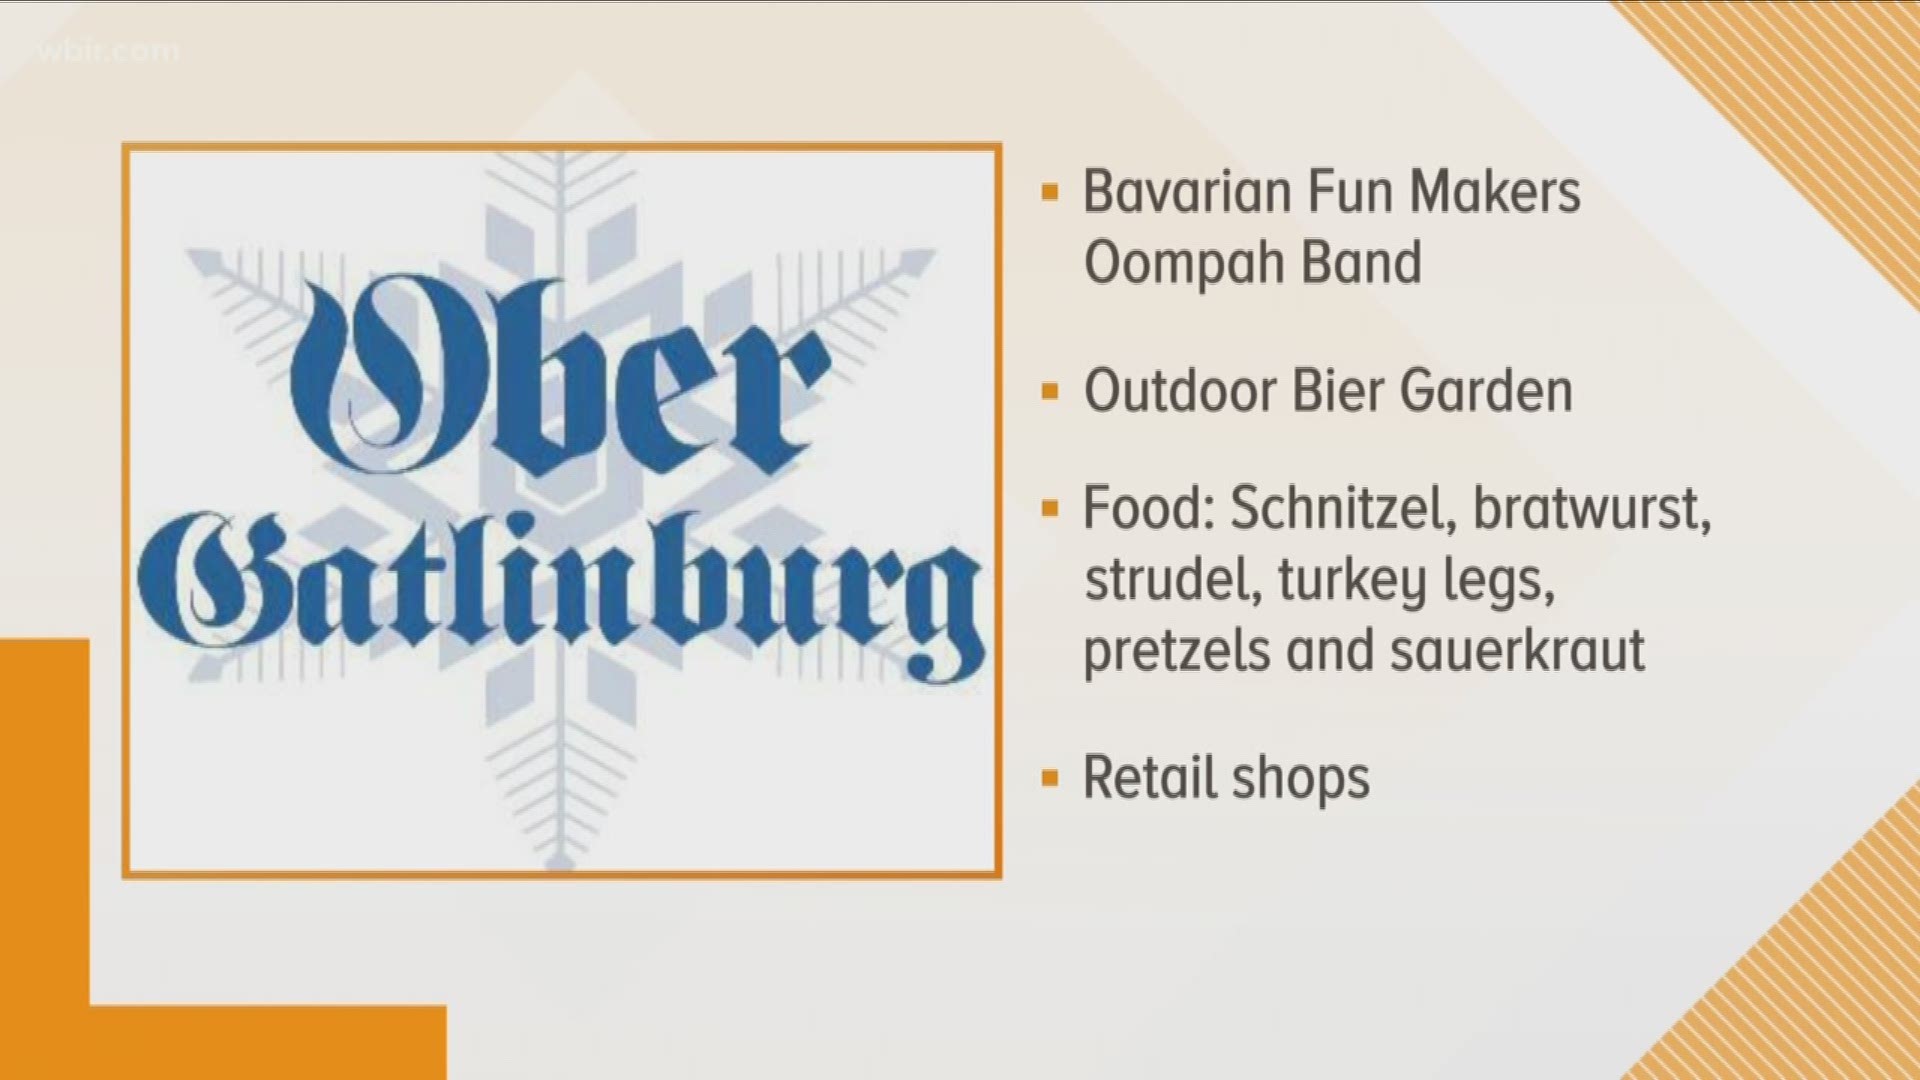 Oktoberfest has been going on all month at Ober Gatlinburg, and there's tons of food and fun activities for the whole family.